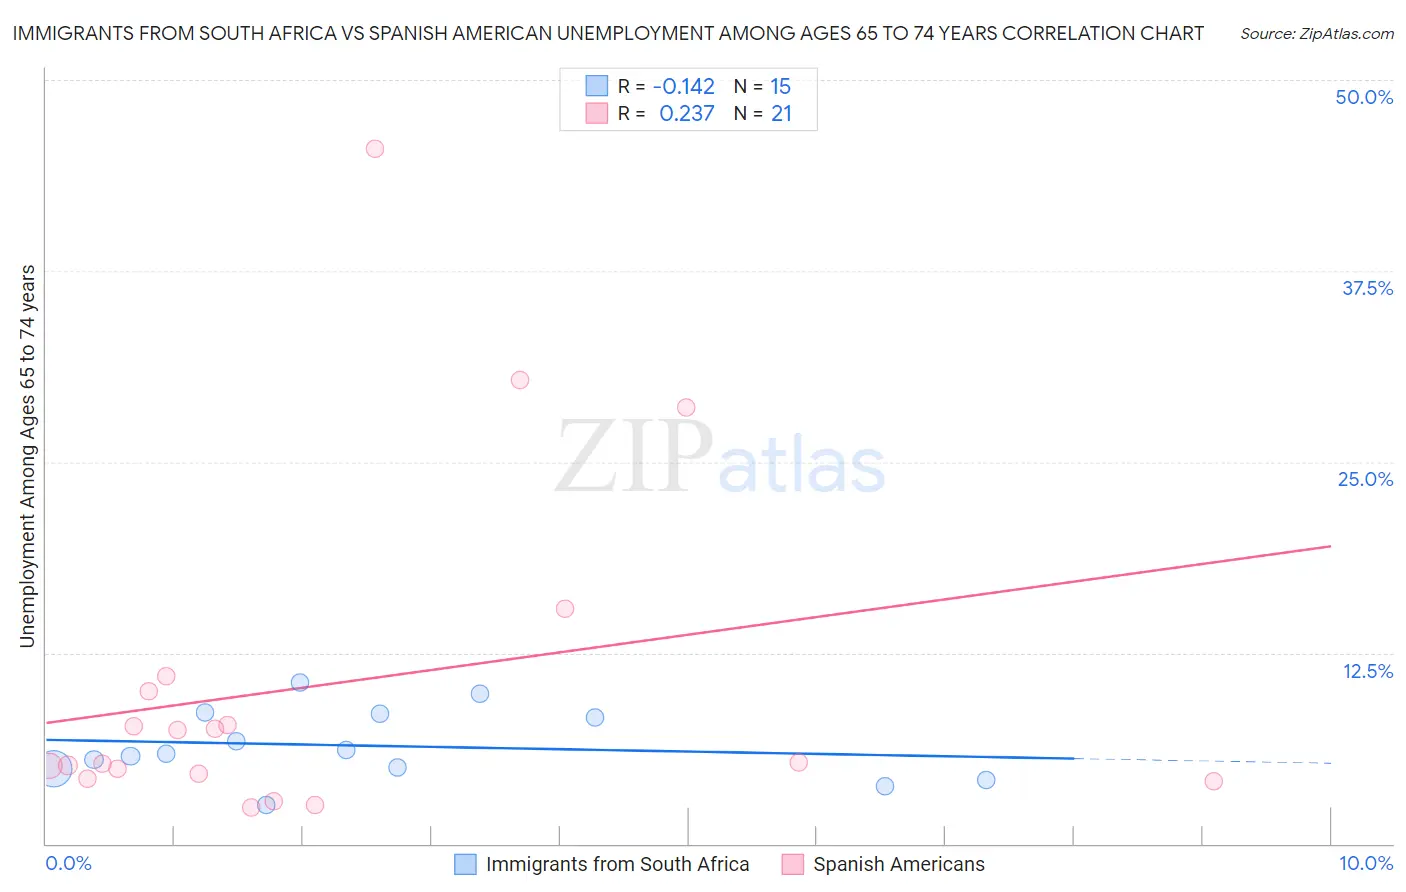 Immigrants from South Africa vs Spanish American Unemployment Among Ages 65 to 74 years